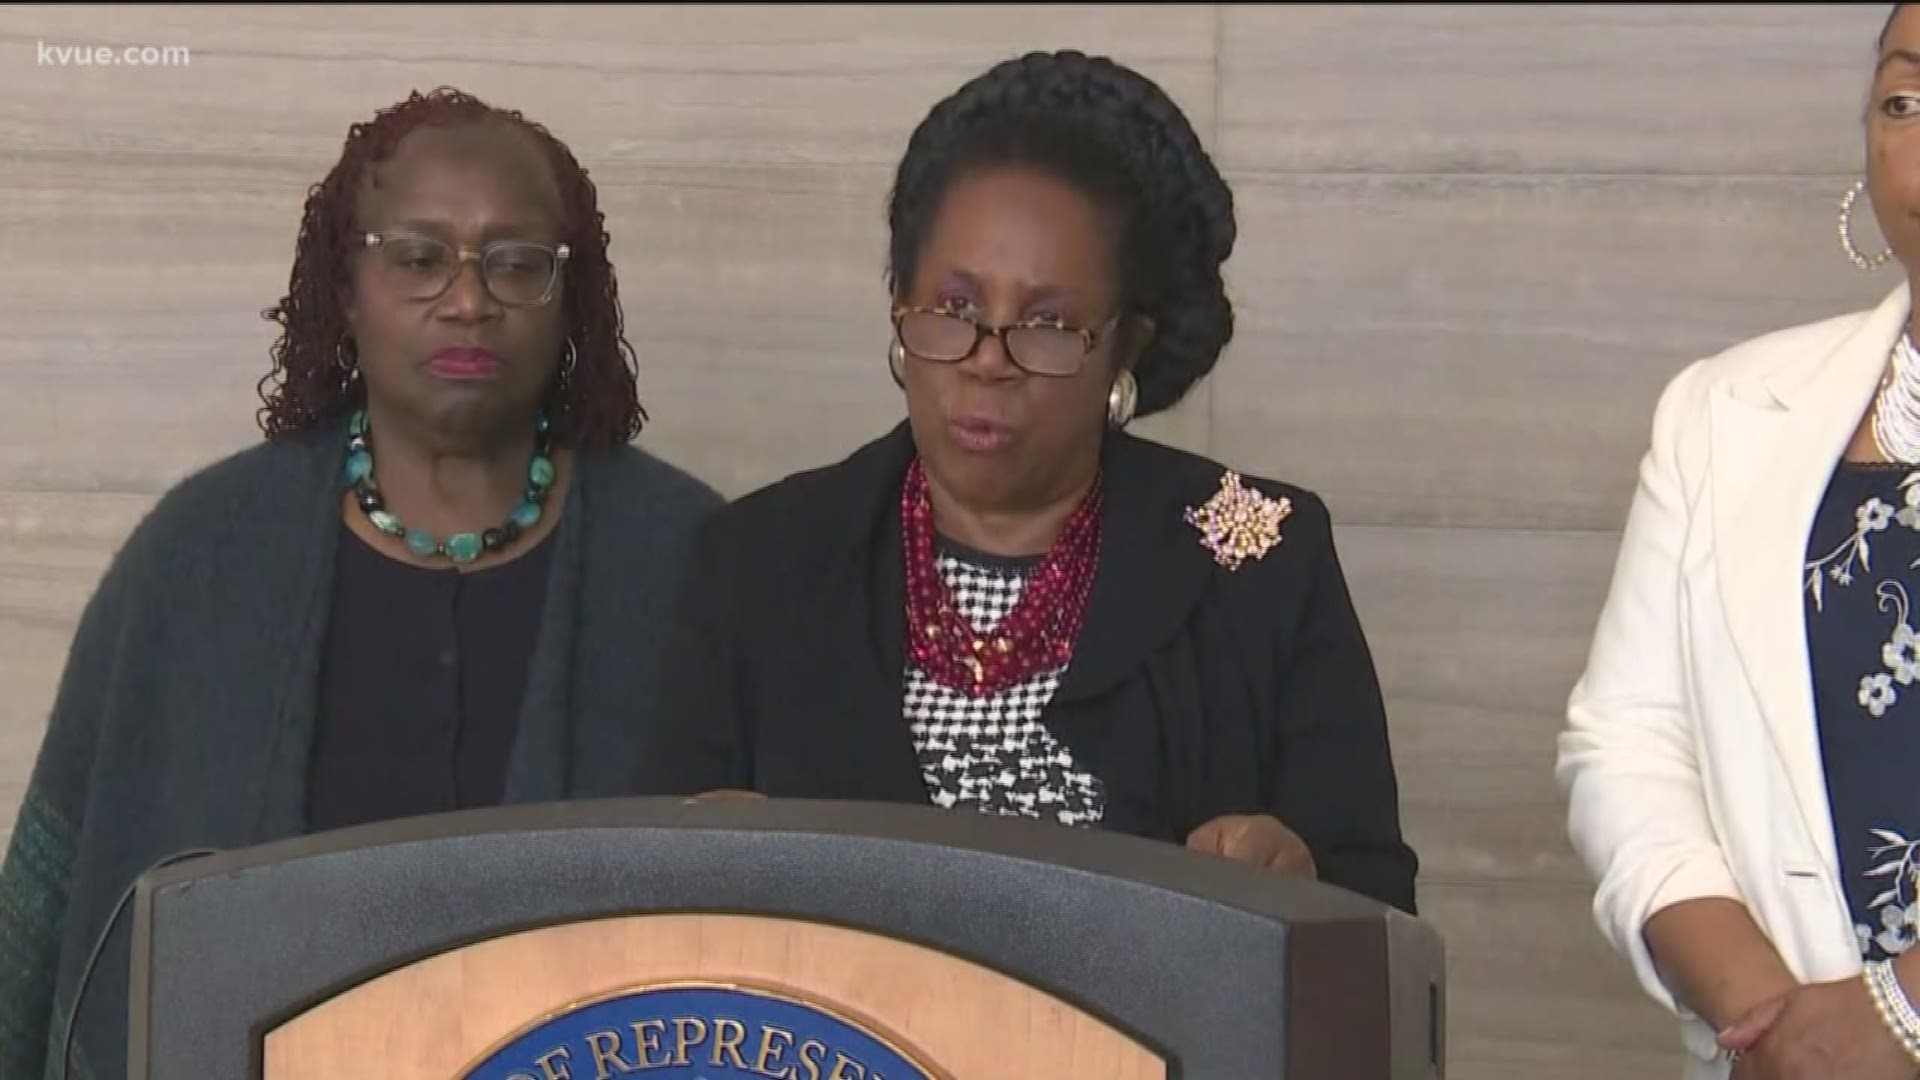 U.S. Representative Sheila Jackson Lee said that Reed should not be executed for the 1996 murder of Stacy Stites.